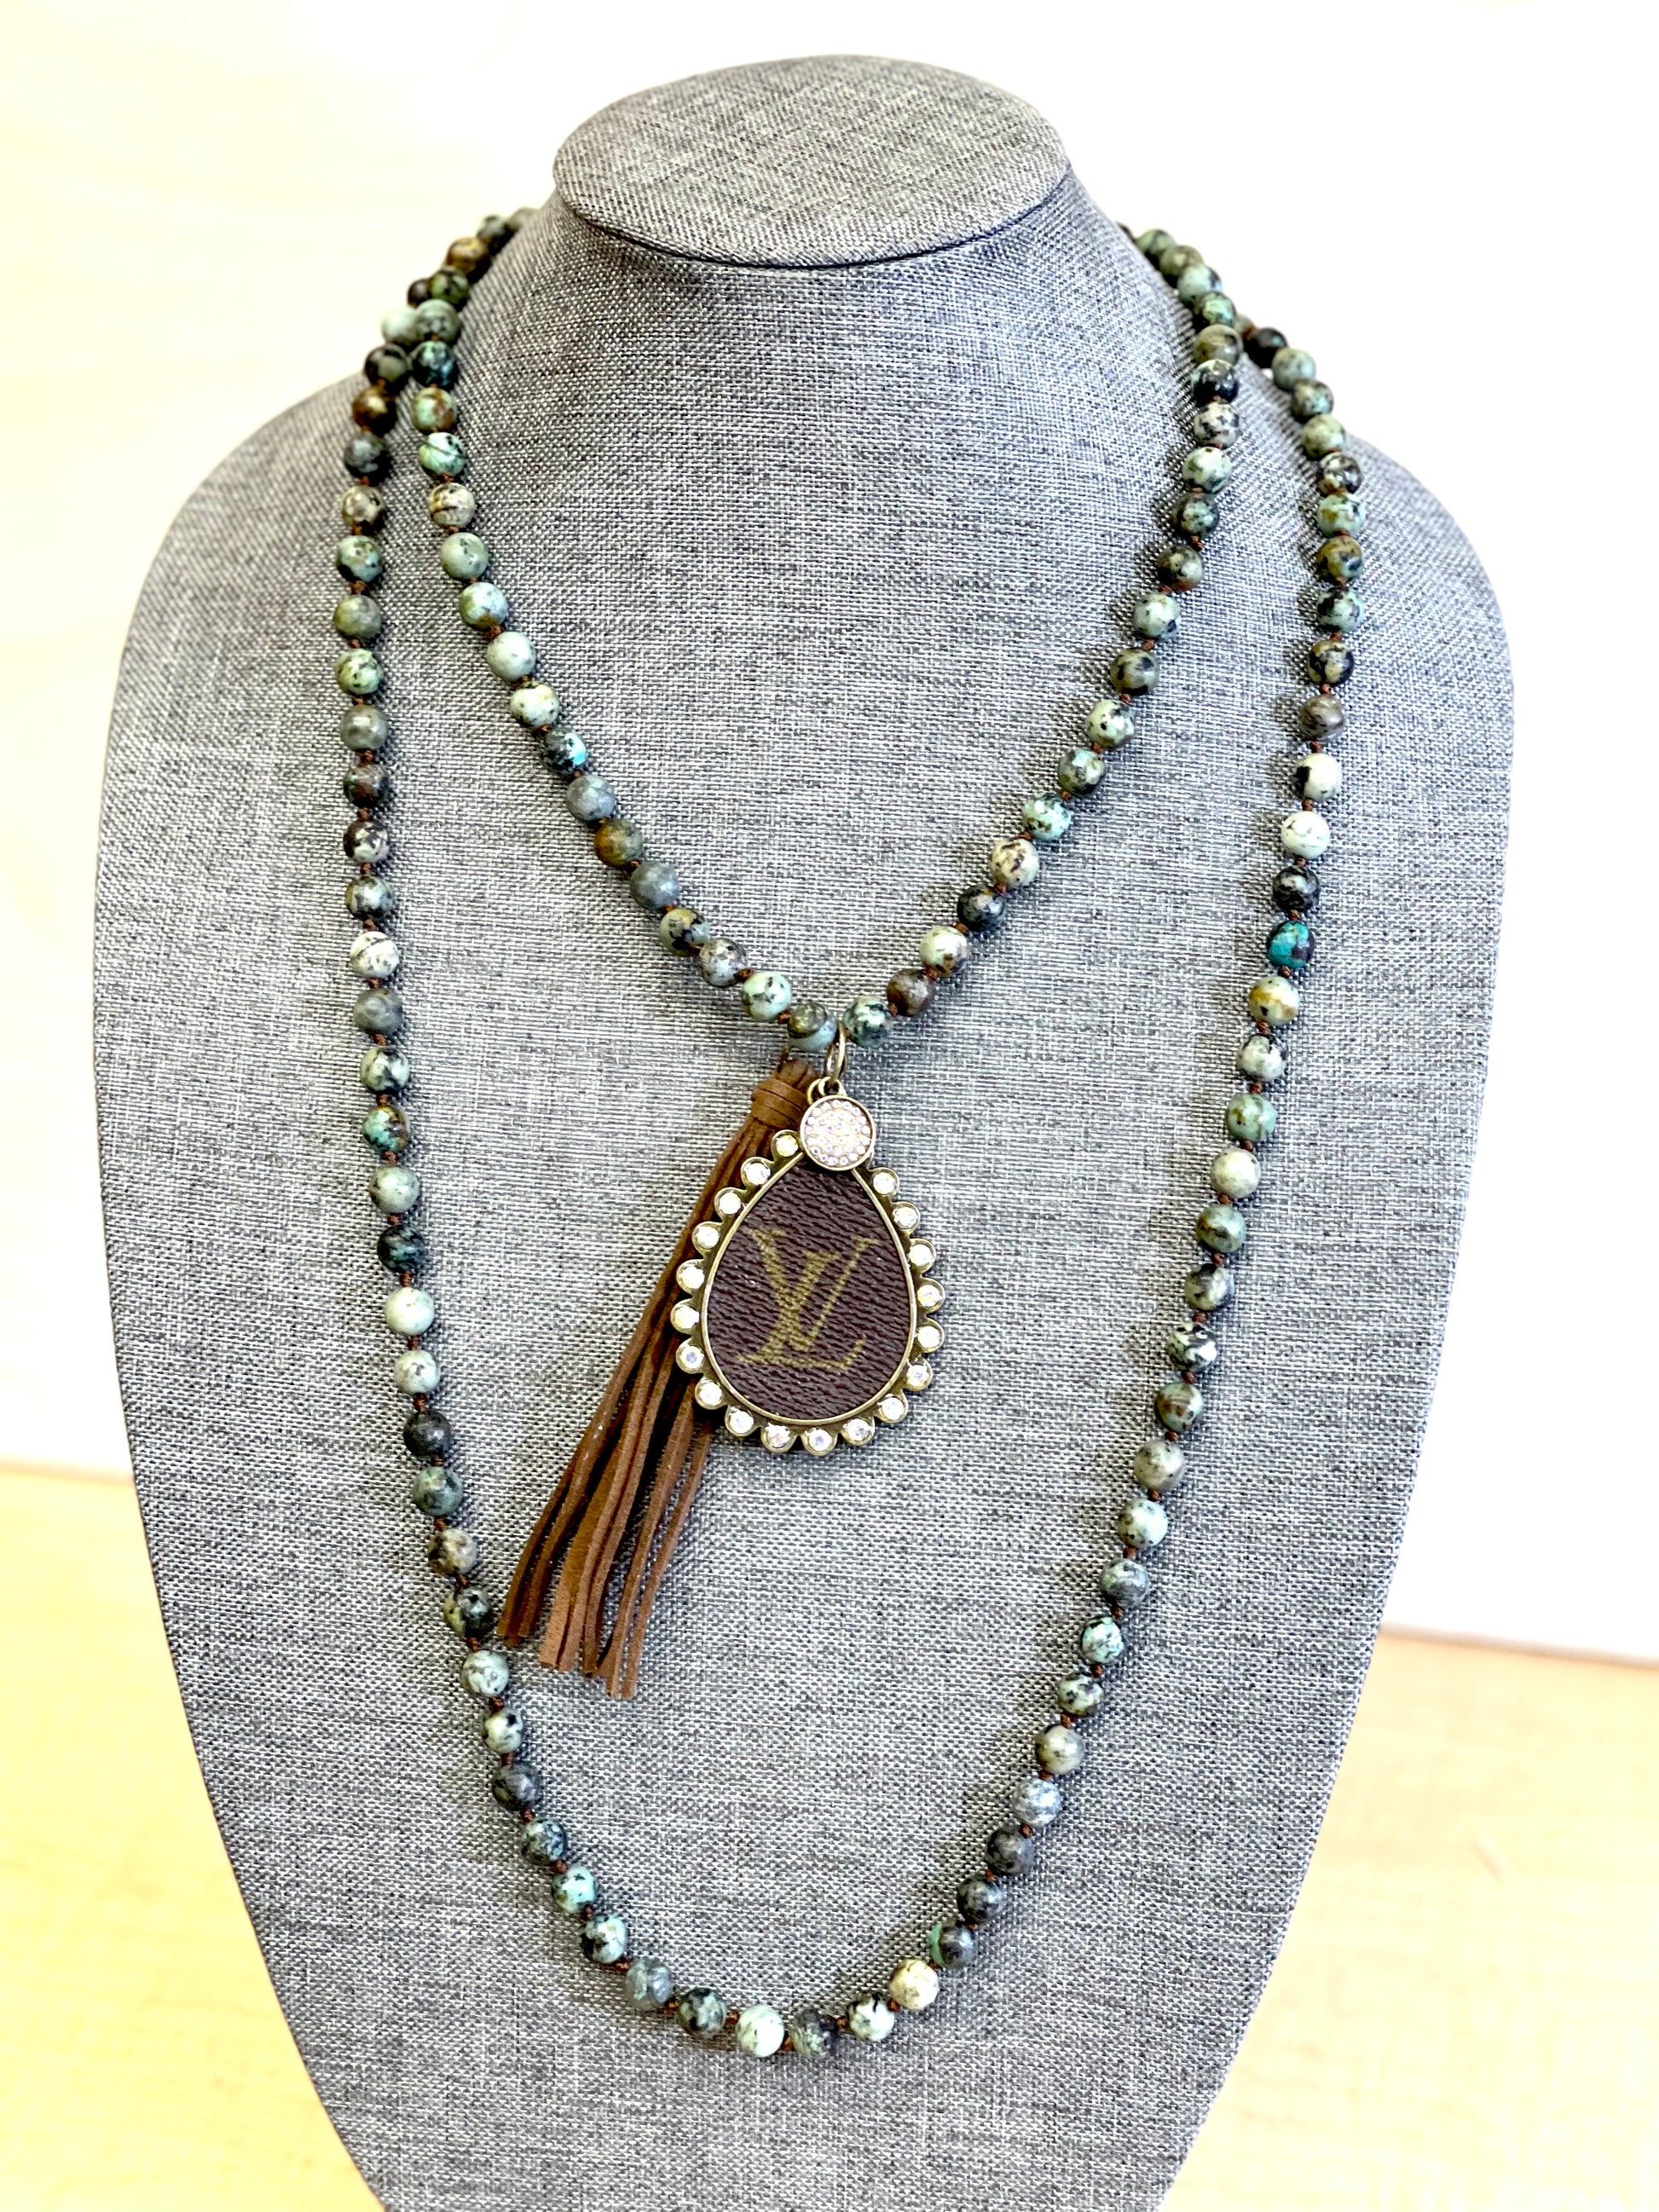 Stone Sea foam necklace with large teardrop pendant - Patches Of Upcycling